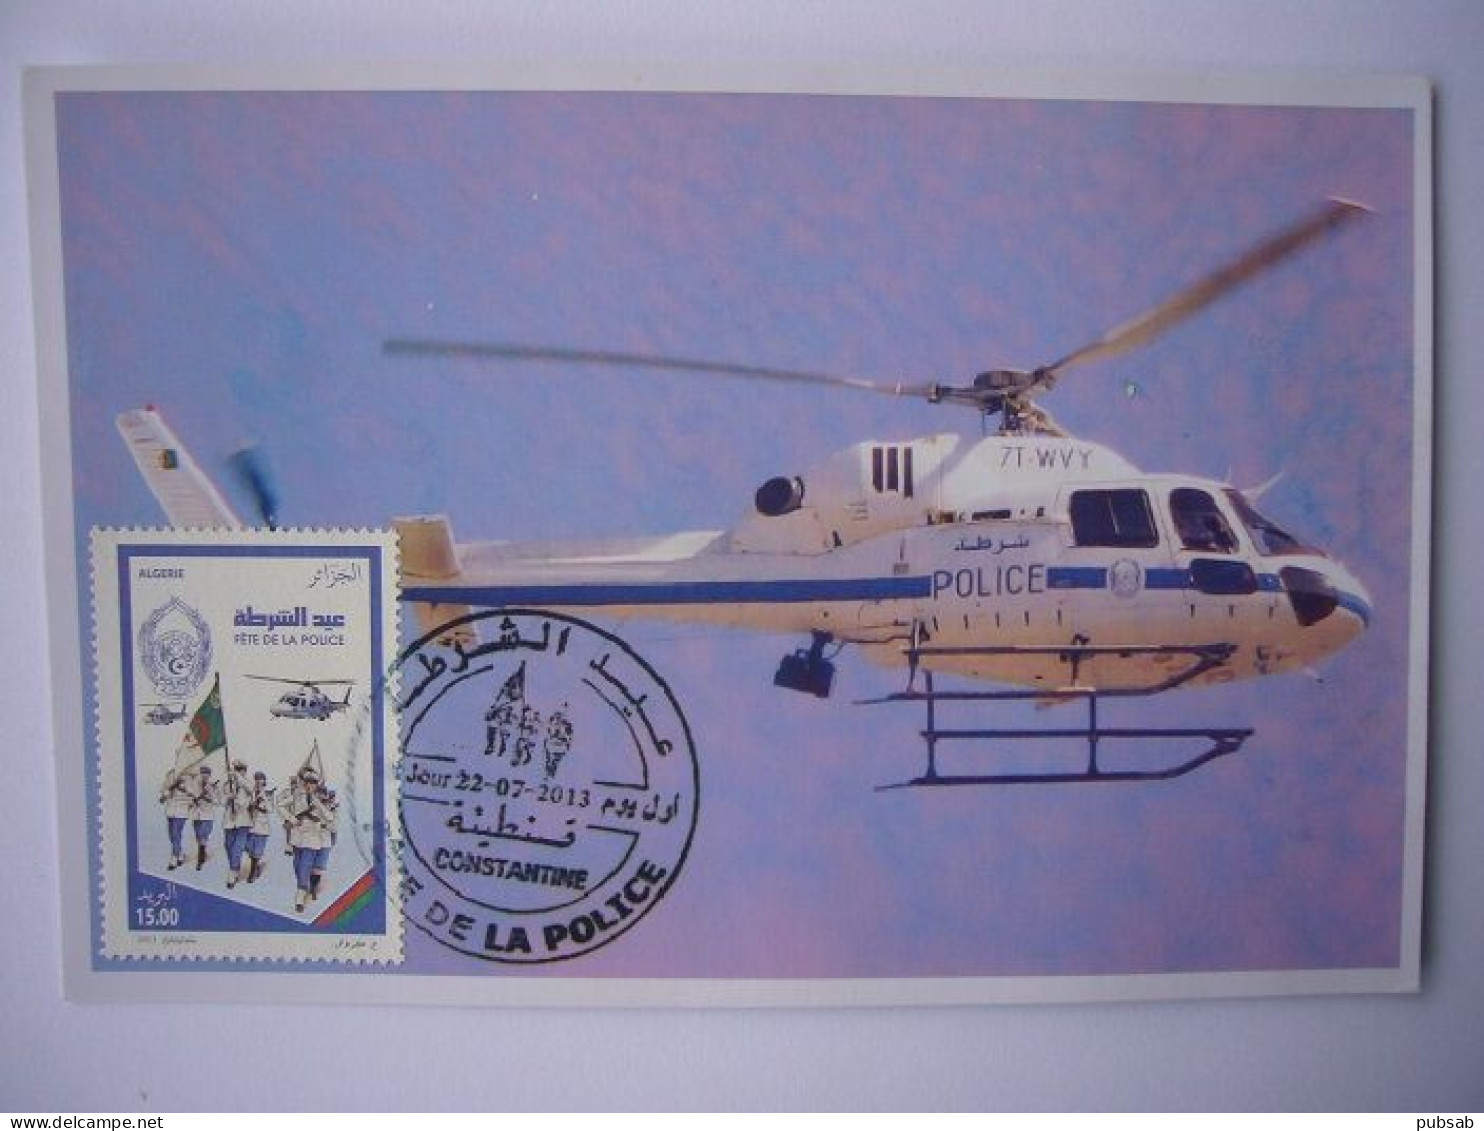 Avion / Airplane / POLICE ALGERIENNE / Helicopter /AS 355N Ecureuil 2 - Elicotteri